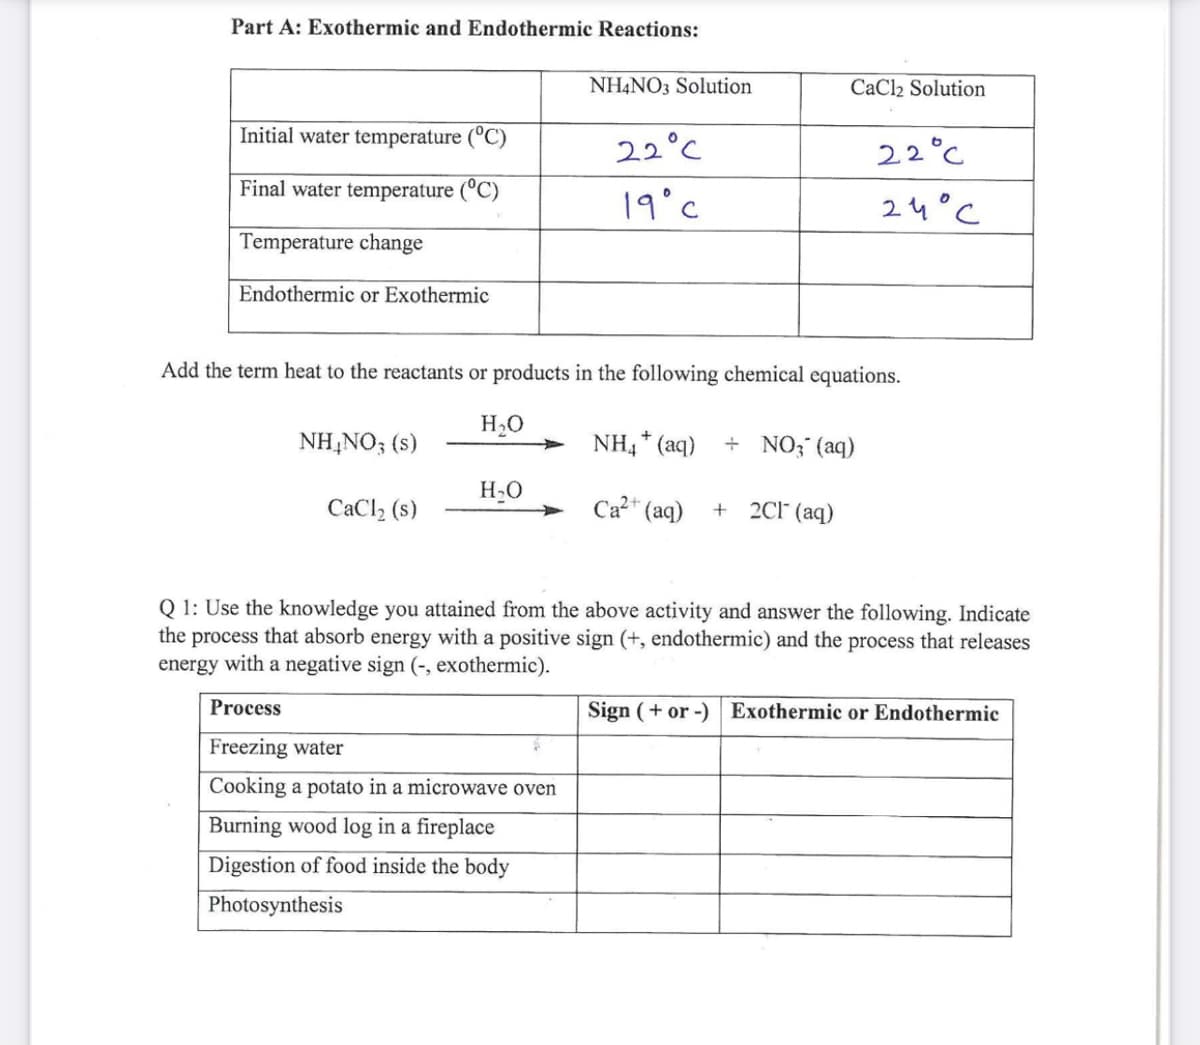 Part A: Exothermic and Endothermic Reactions:
NH4NO3 Solution
CaCl2 Solution
Initial water temperature (°C)
22°C
22°C
Final water temperature (°C)
19°c
24°C
Temperature change
Endothermic or Exothermic
Add the term heat to the reactants or products in the following chemical equations.
H20
NH,NO; (s)
NH, * (aq)
+ NO; (aq)
H2O
CaCl2 (s)
Ca* (aq)
2C1 (aq)
Q 1: Use the knowledge you attained from the above activity and answer the following. Indicate
the process that absorb energy with a positive sign (+, endothermic) and the process that releases
energy with a negative sign (-, exothermic).
Process
Sign (+ or -) Exothermic or Endothermic
Freezing water
Cooking a potato in a microwave oven
Burning wood log in a fireplace
Digestion of food inside the body
Photosynthesis
